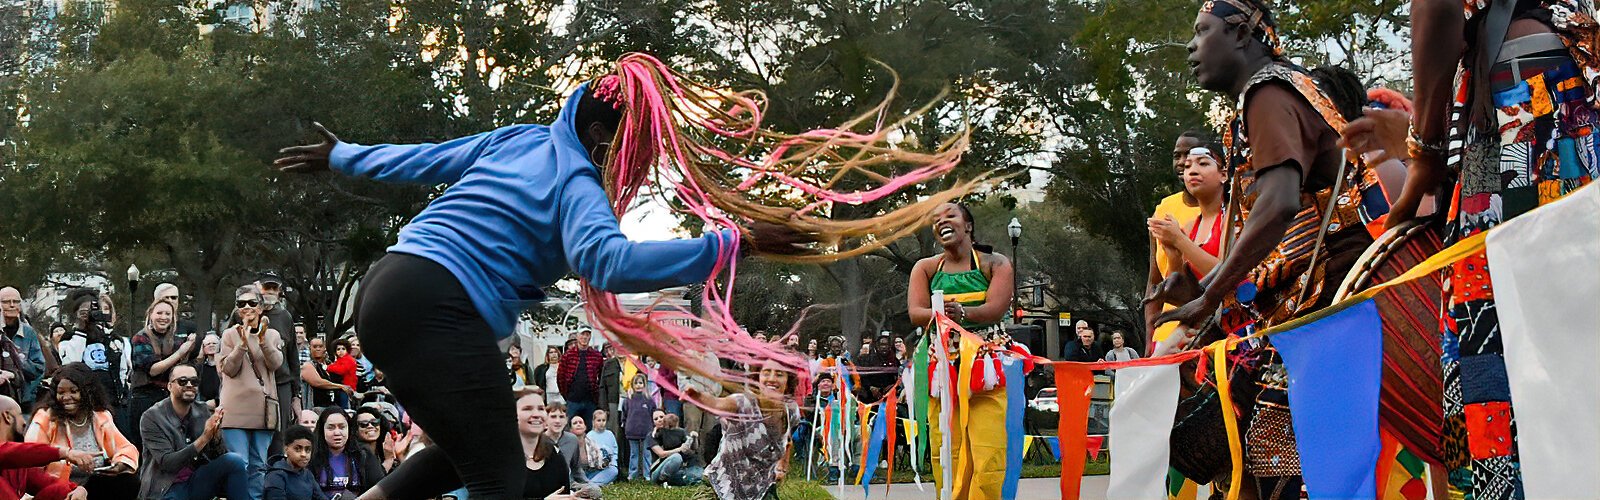 Enthralled by the Dundu Dole performance, a spectator spontaneously lets her long pink strands of hair loose and dances her way to the dancers to everyone’s delight.